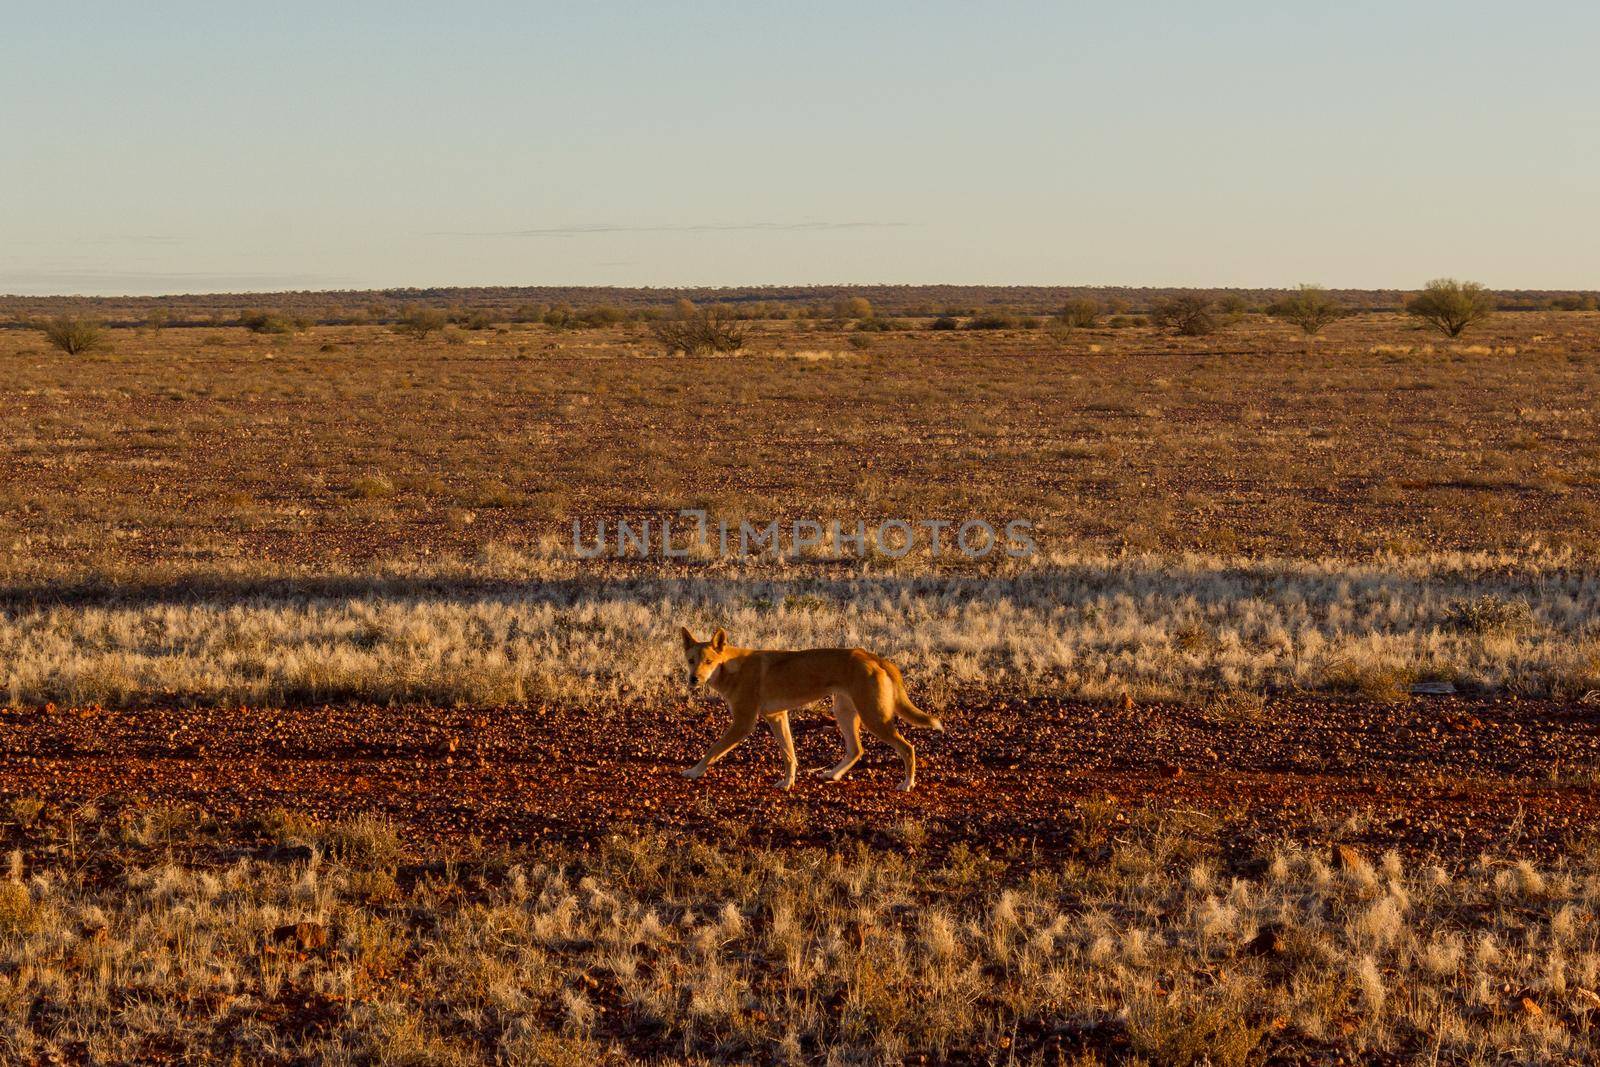 Australian dingo looking for a prey in the middle of the outback in central Australia. The dingo is looking towards the left, south australia by bettercallcurry